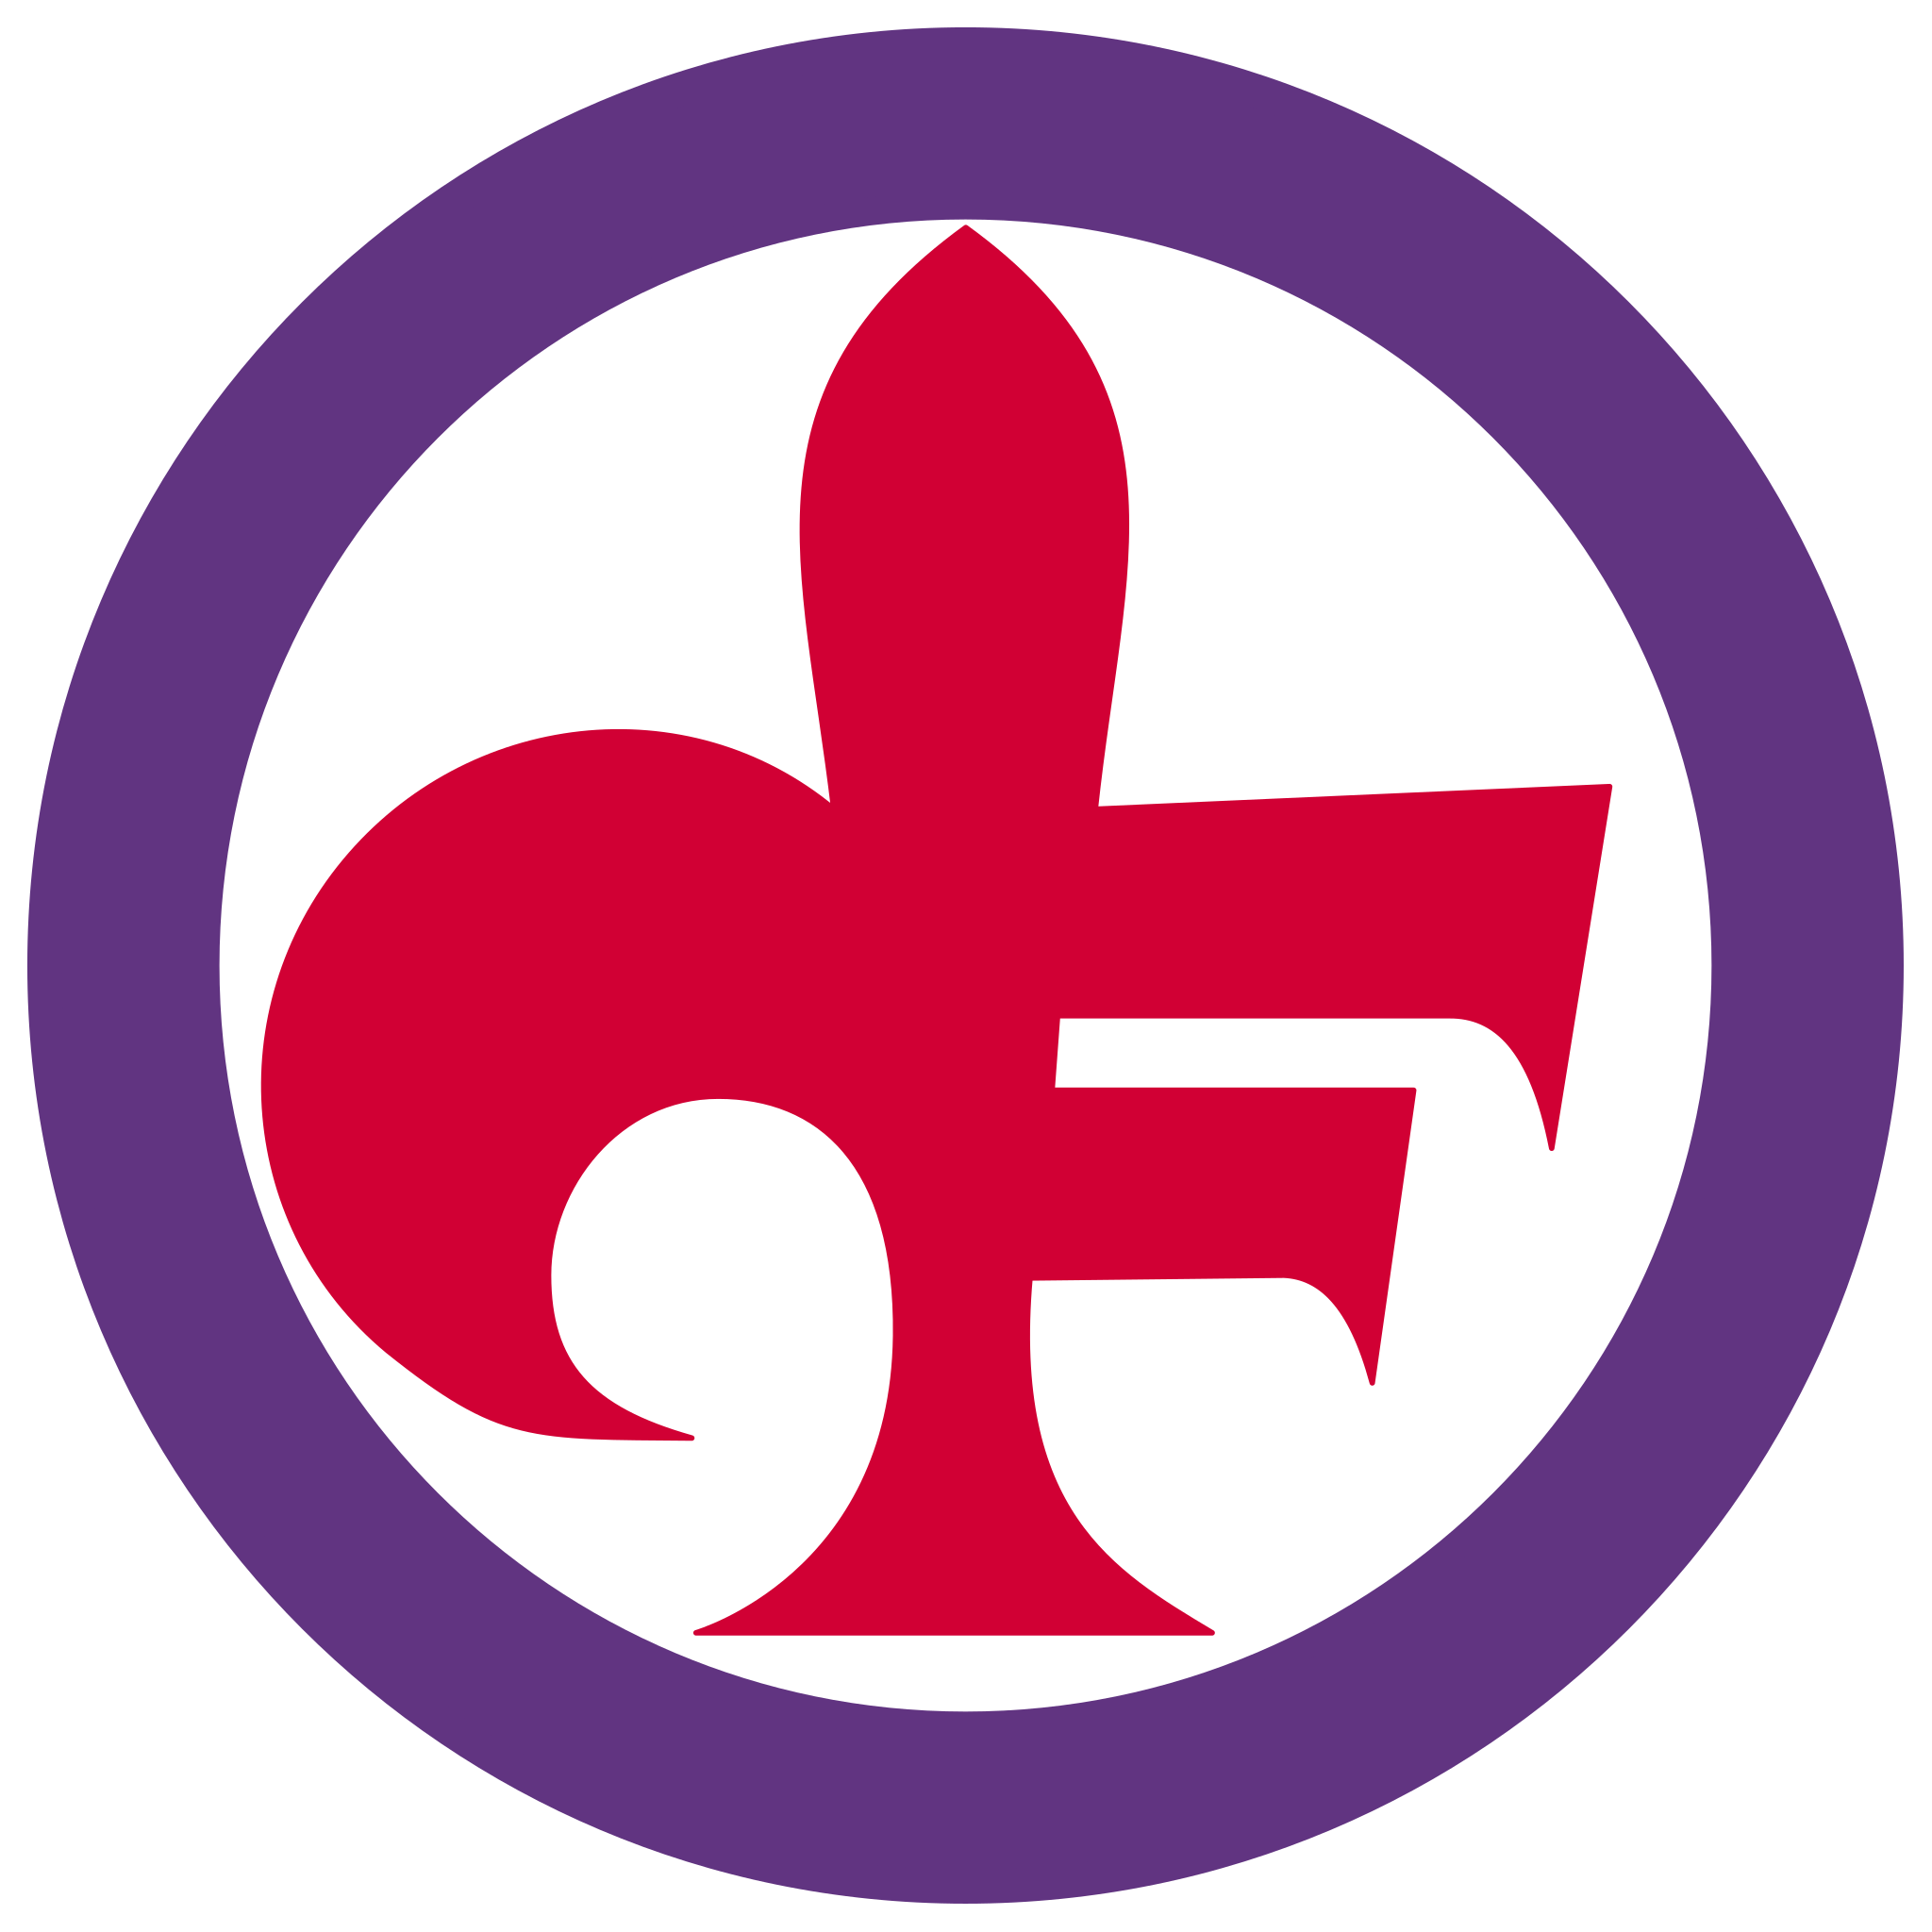 http://images2.wikia.nocookie.net/__cb20120308193353/logopedia/images/5/55/Fiorentina@2.-old-logo.png